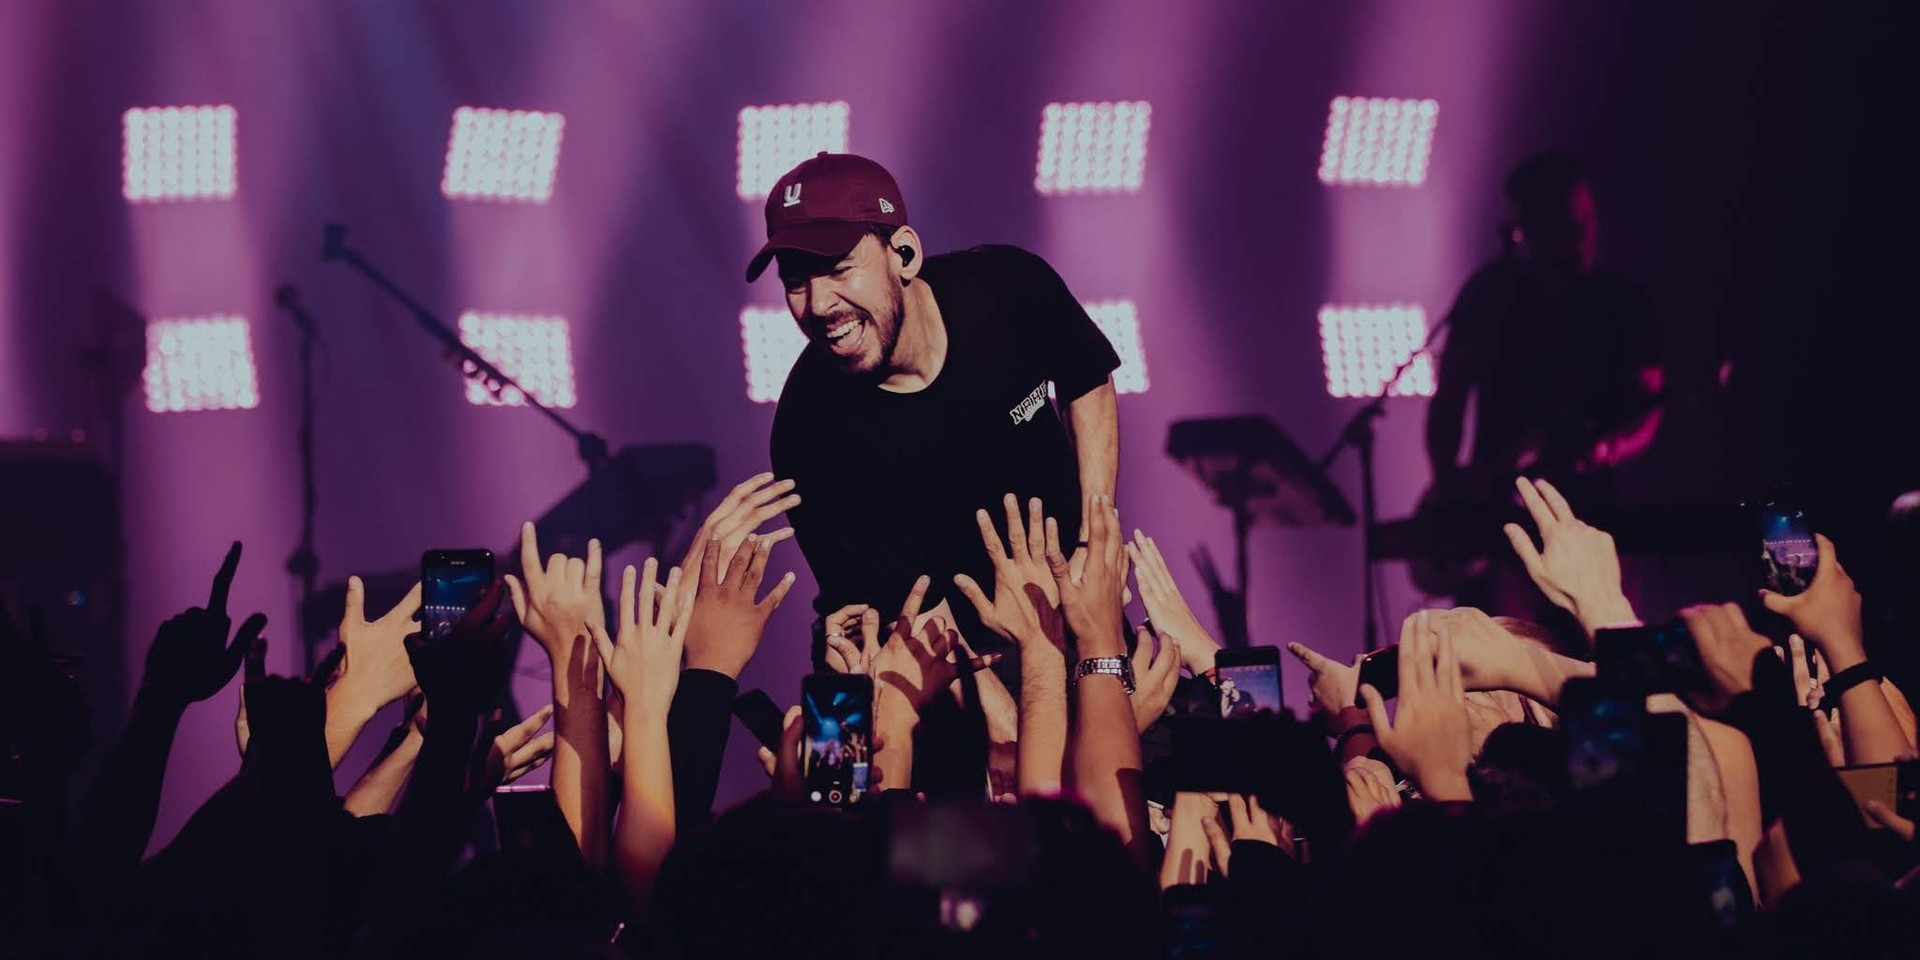 Mike Shinoda serves up fresh rhymes and nostalgia at first solo Manila concert – photo gallery